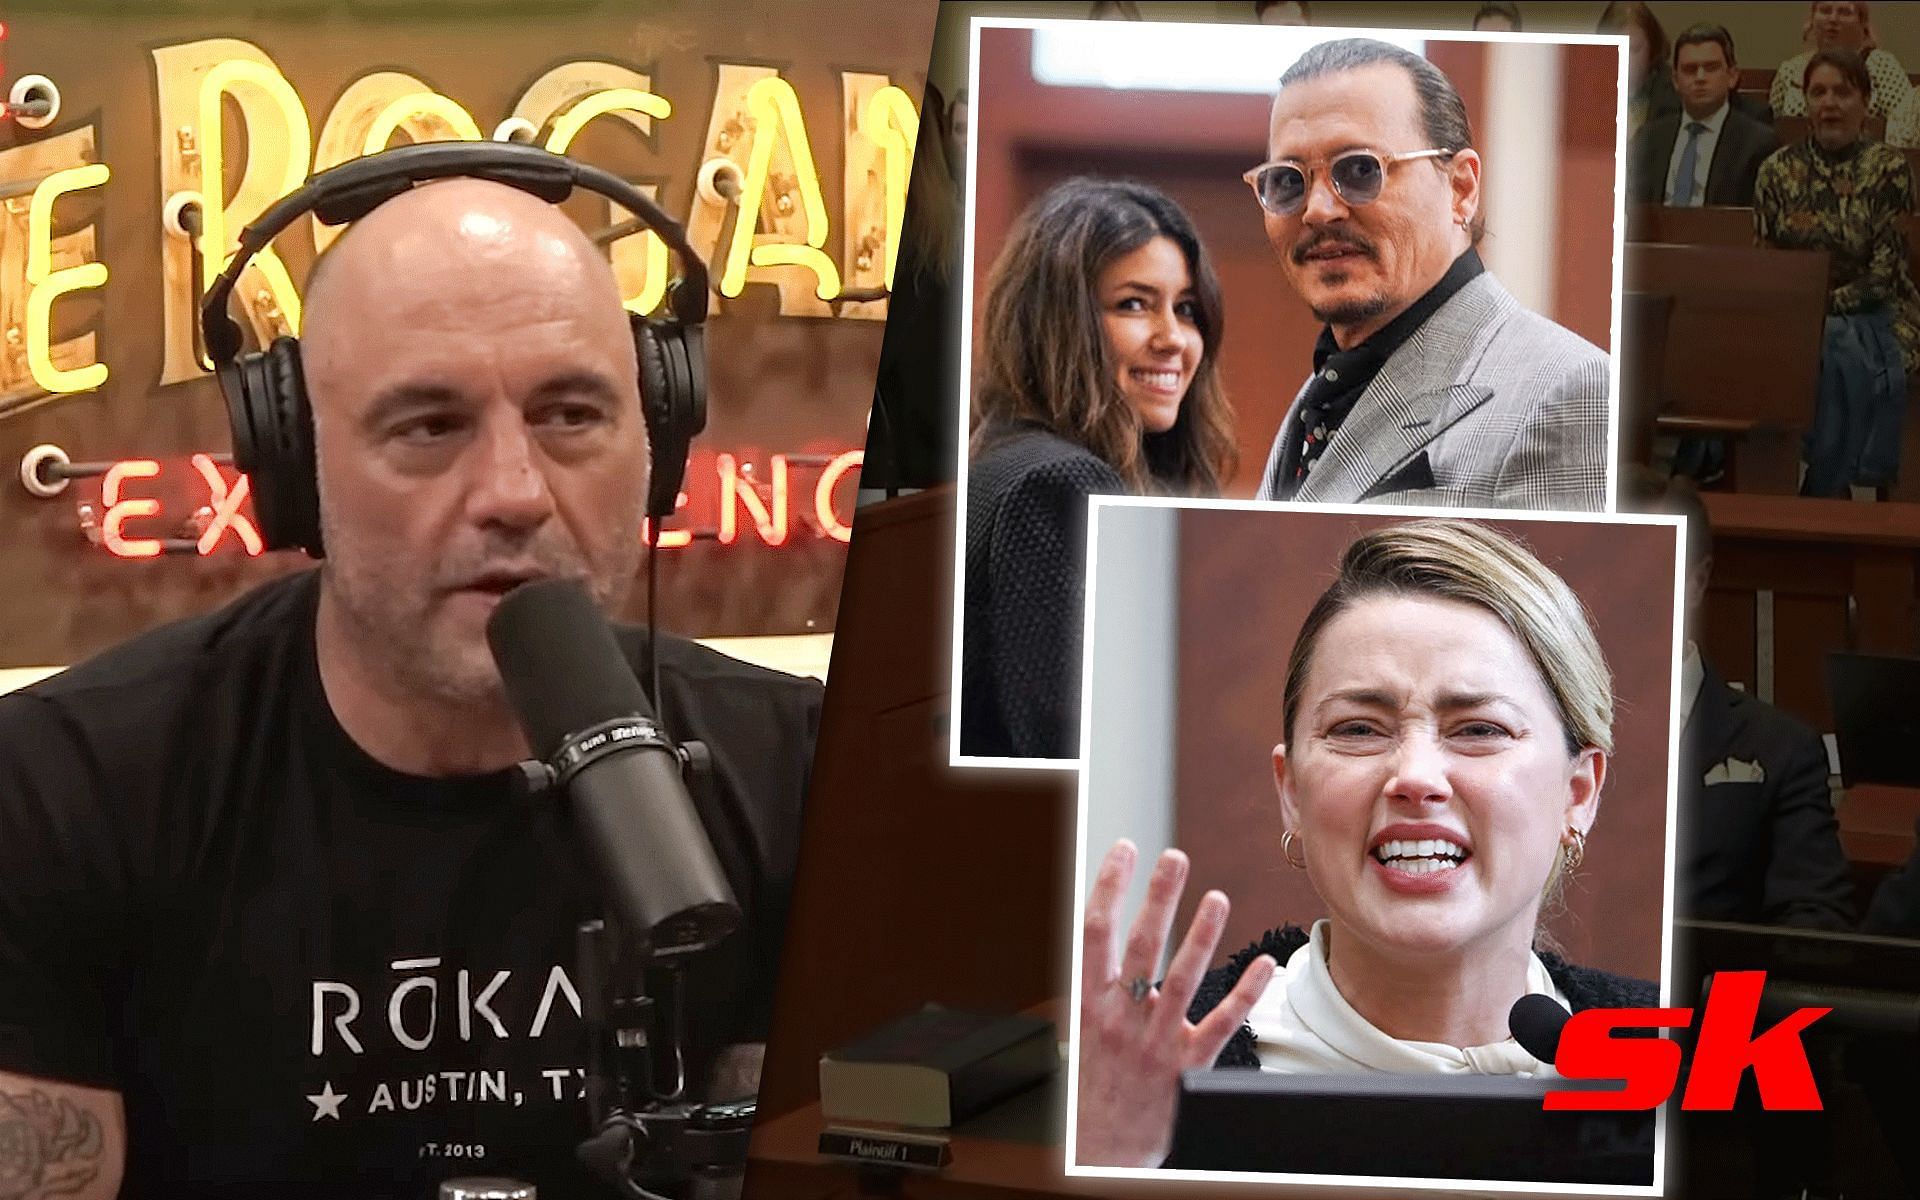 Joe Rogan (left), Johnny Depp (top right), Amber Heard (bottom right) [Images courtesy of Powerful JRE and Law &amp; Crime Network on YouTube]